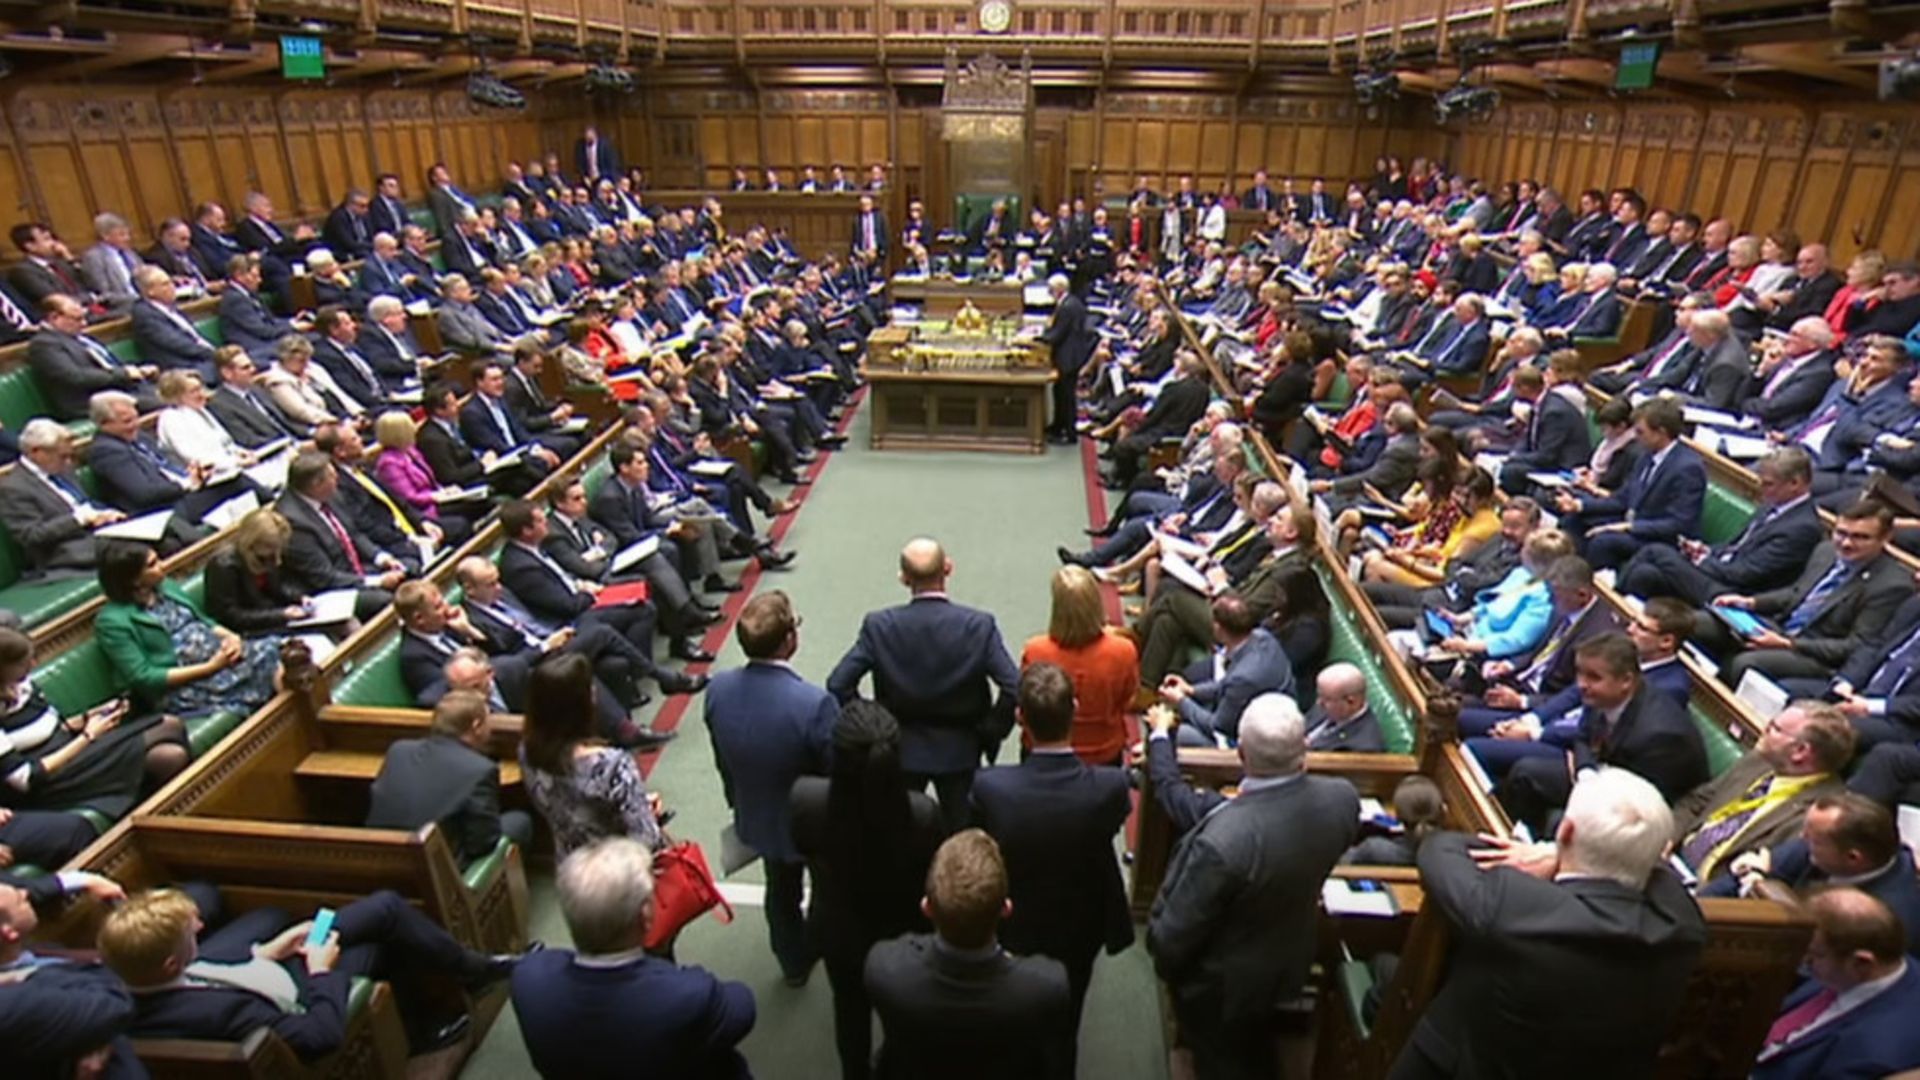 MPs in the House of Commons - Credit: PA